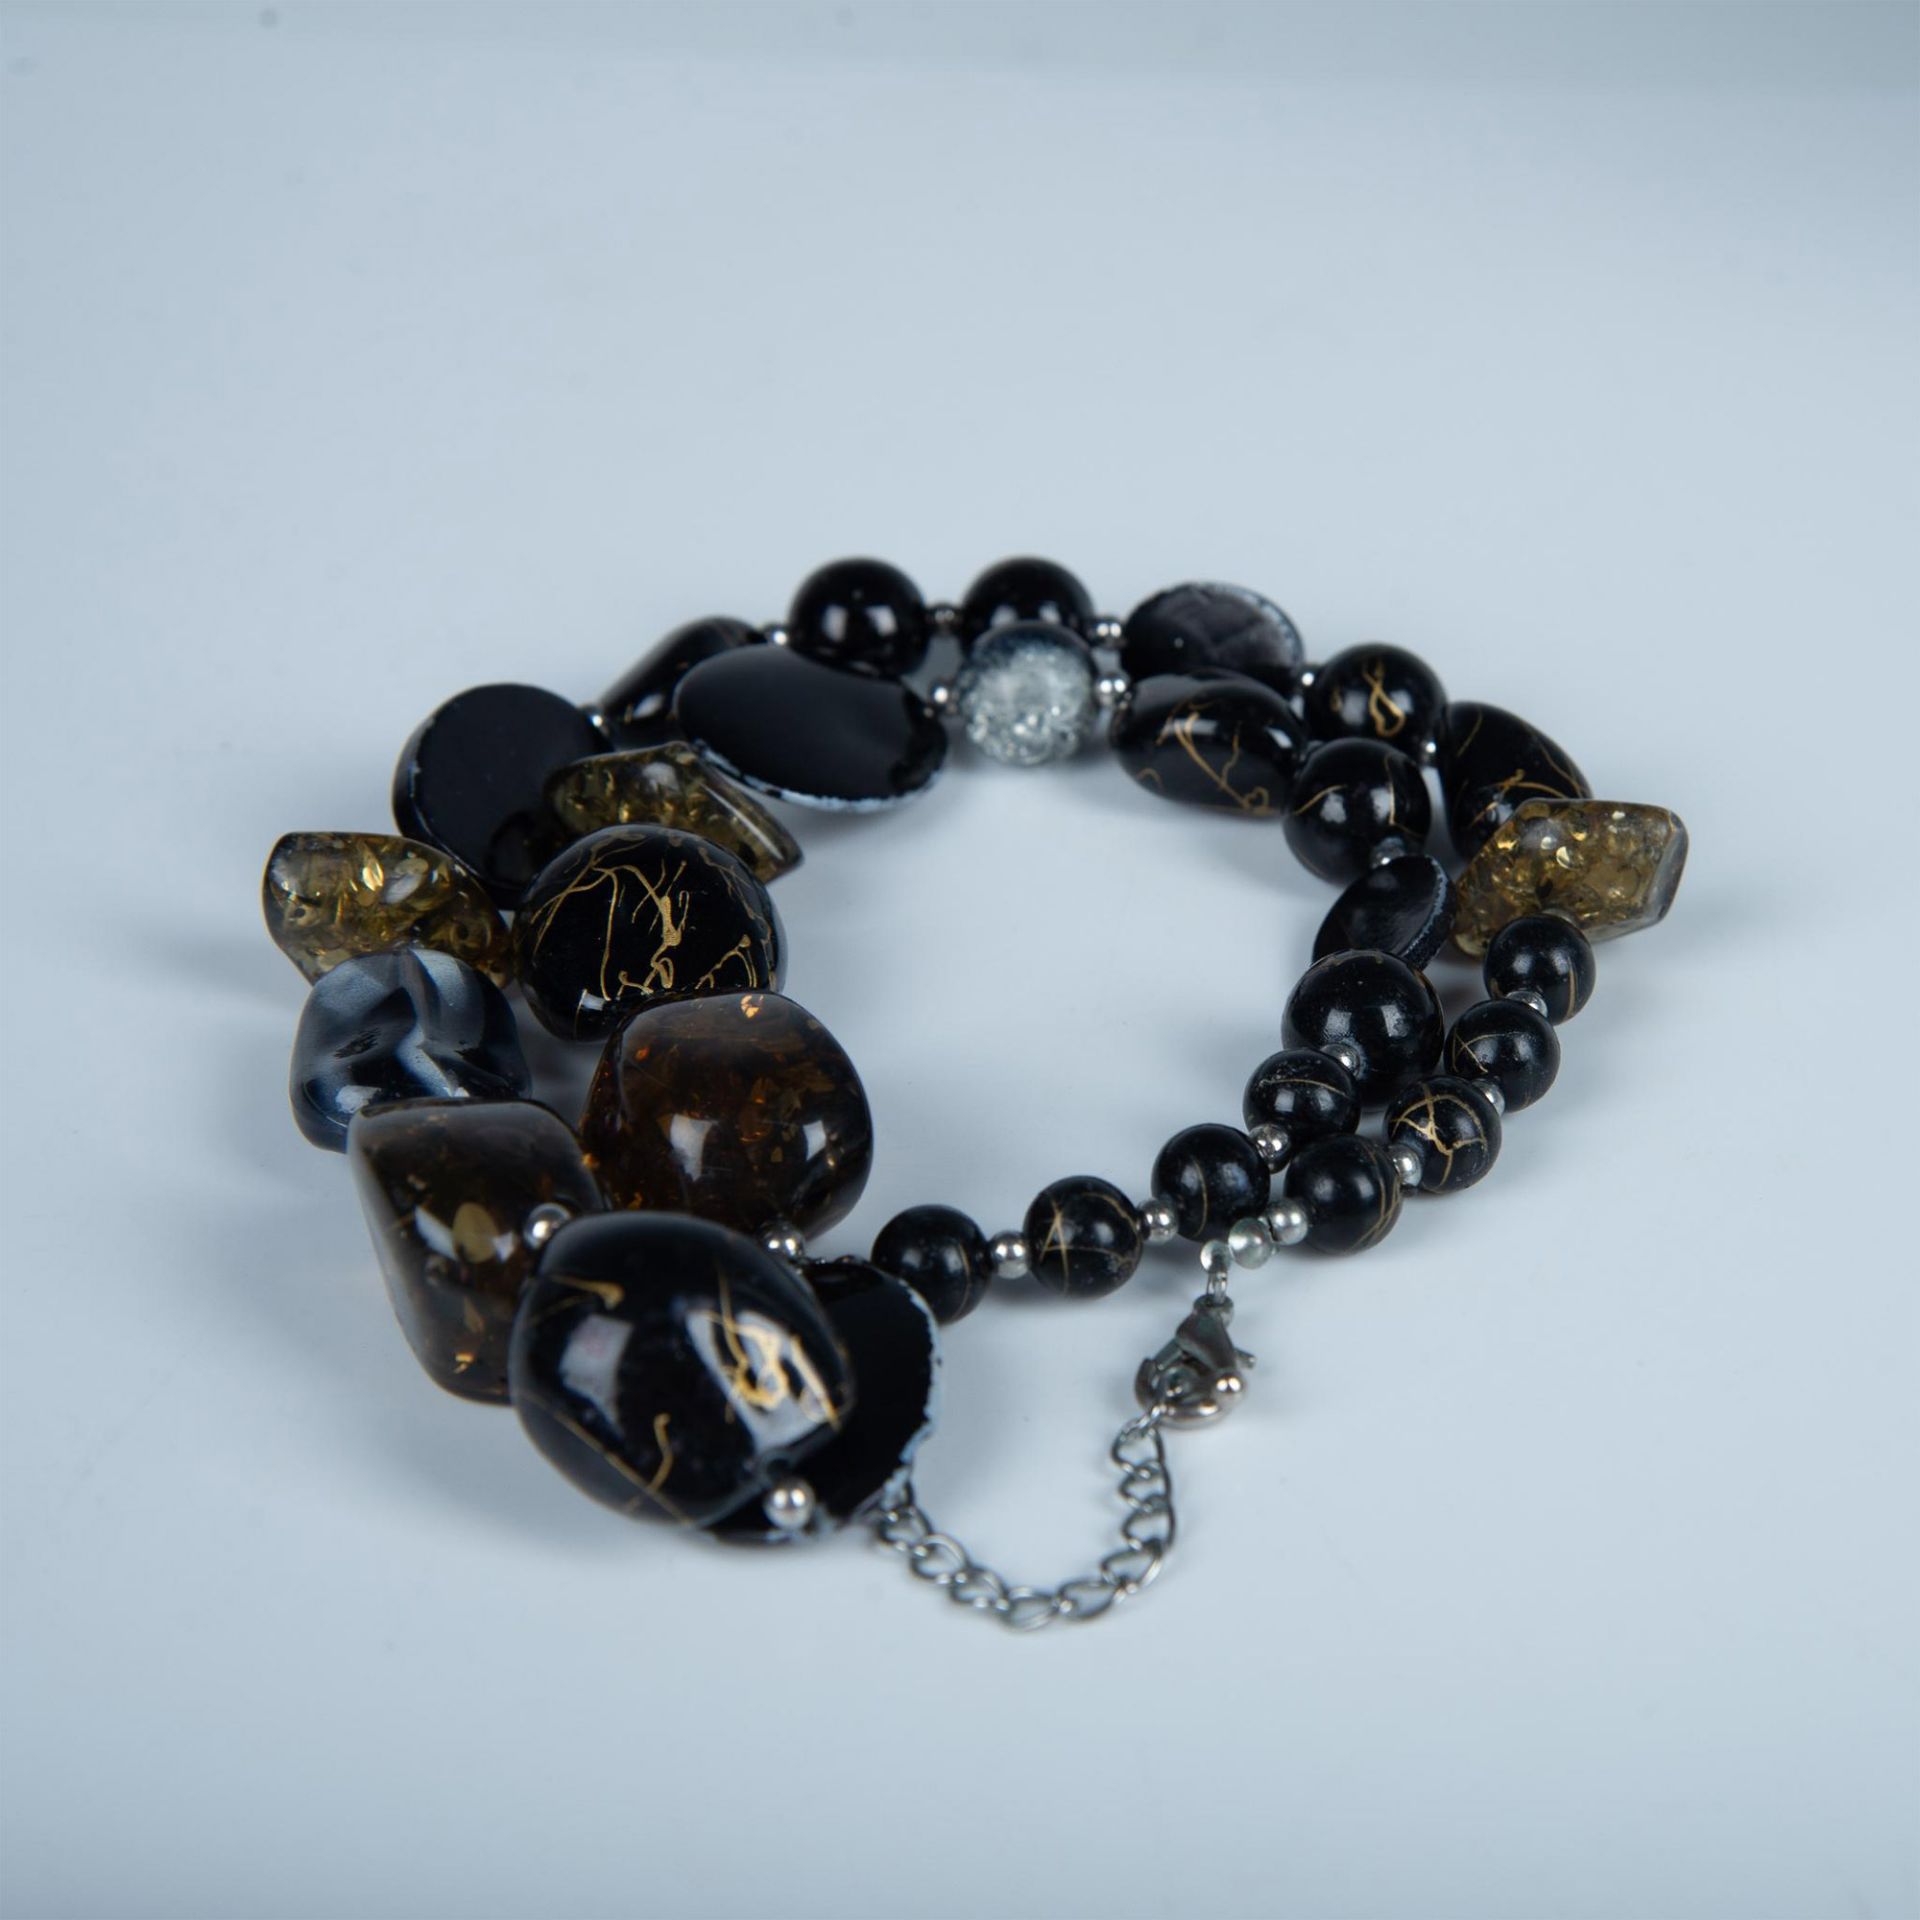 Gorgeous Faux Amber and Black Bead Necklace - Image 4 of 4